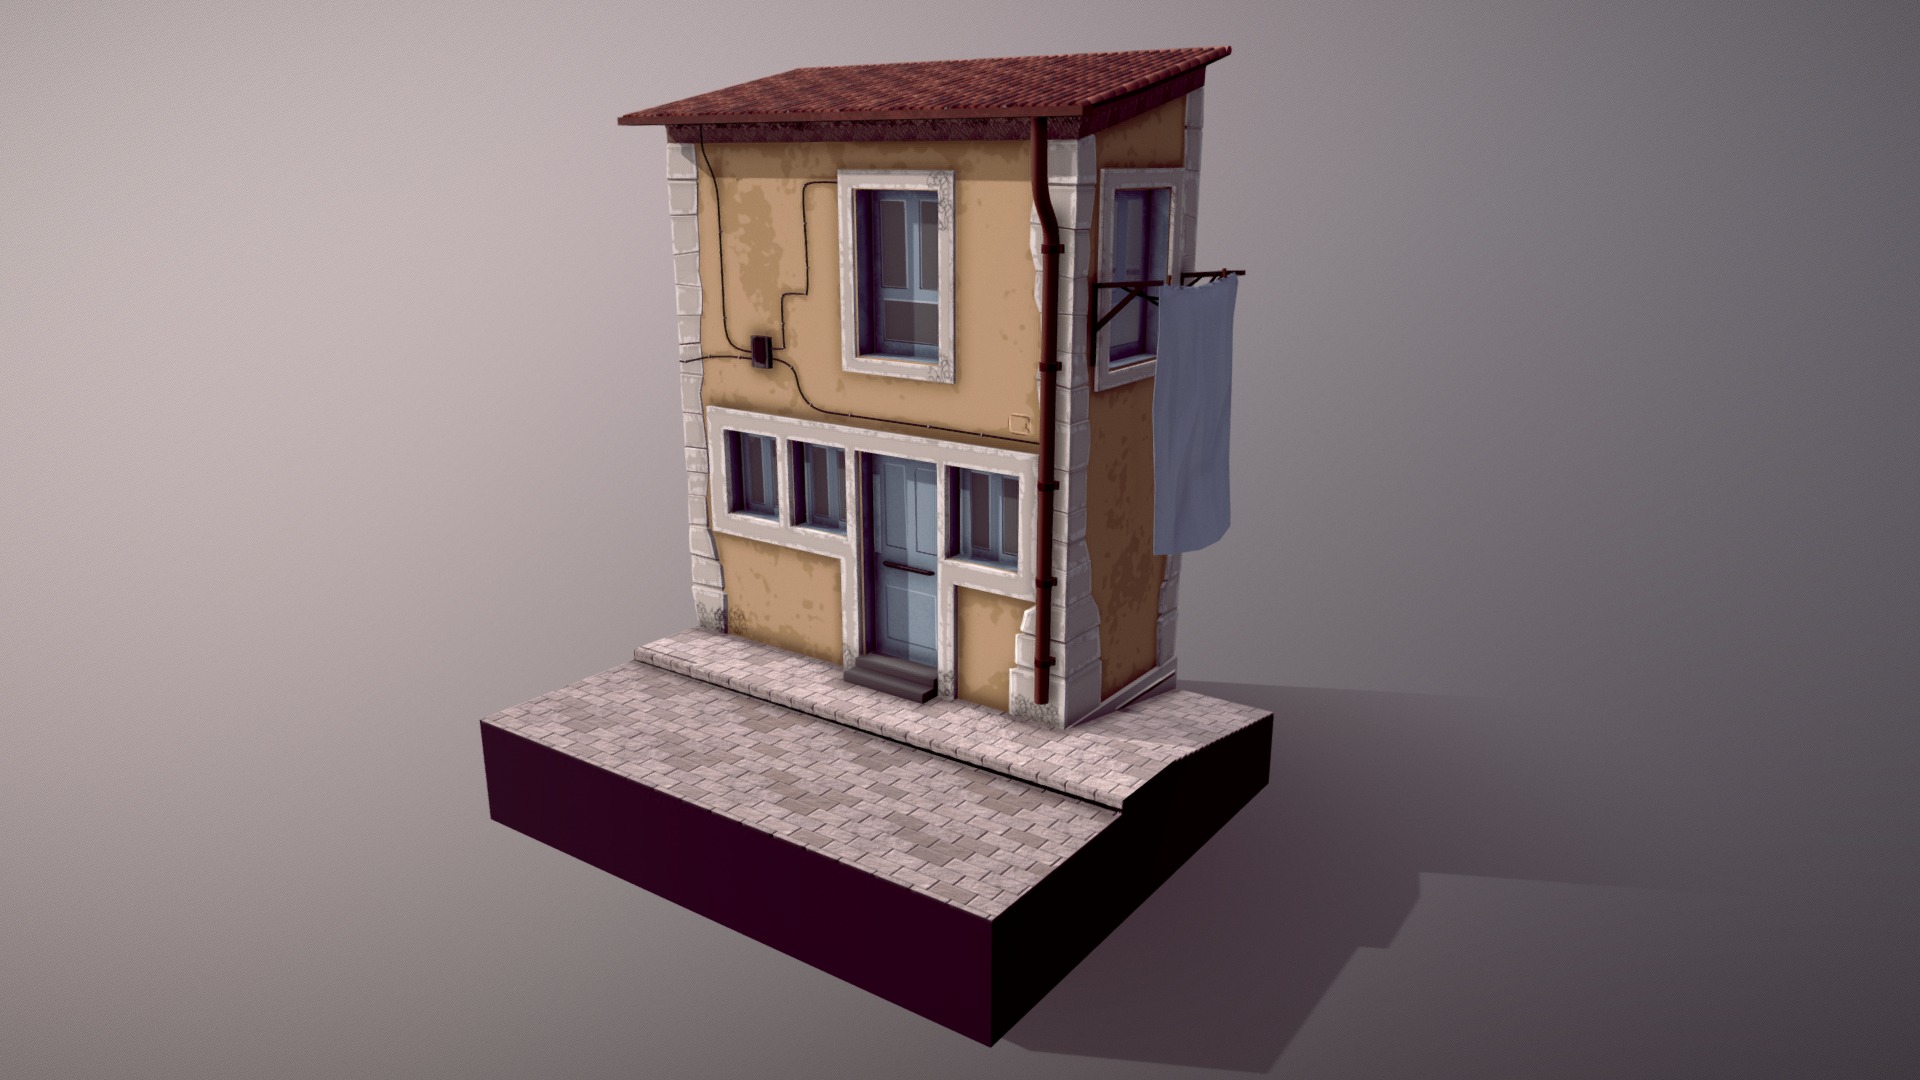 3D model Tiny House - This is a 3D model of the Tiny House. The 3D model is about a small wooden house.